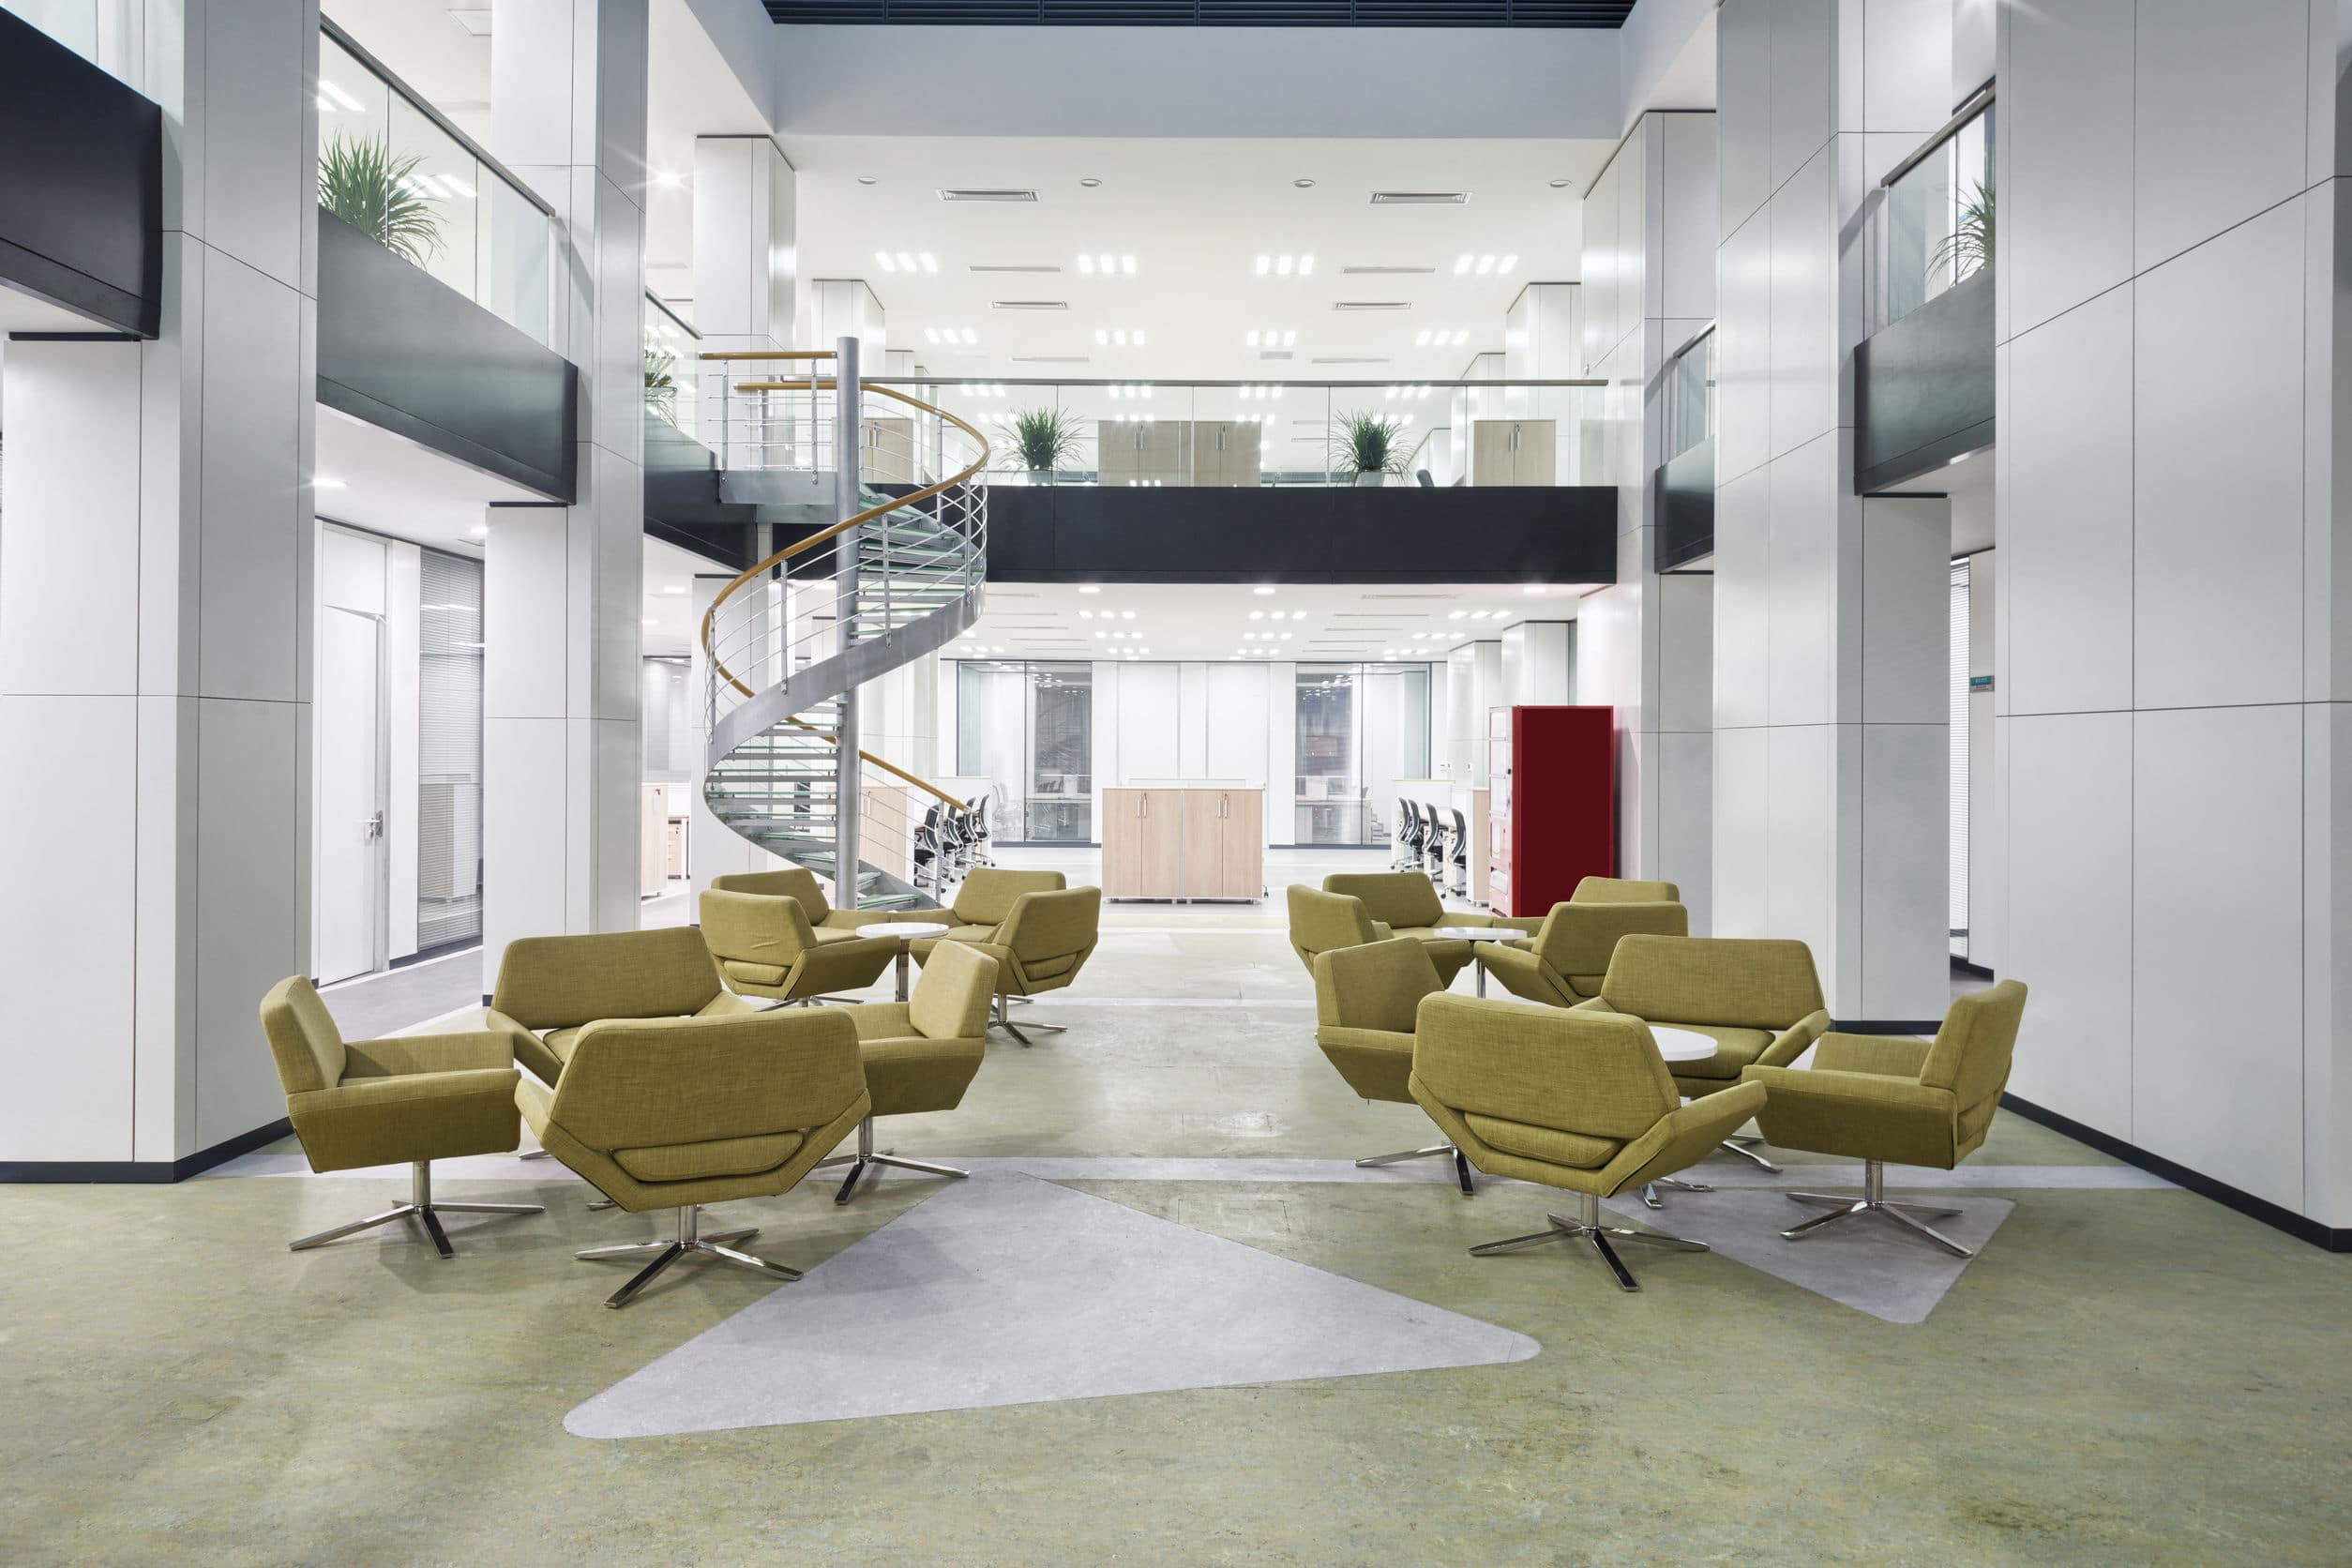 Modern Office Lobby Supporting Smart Learning Environments of the Future